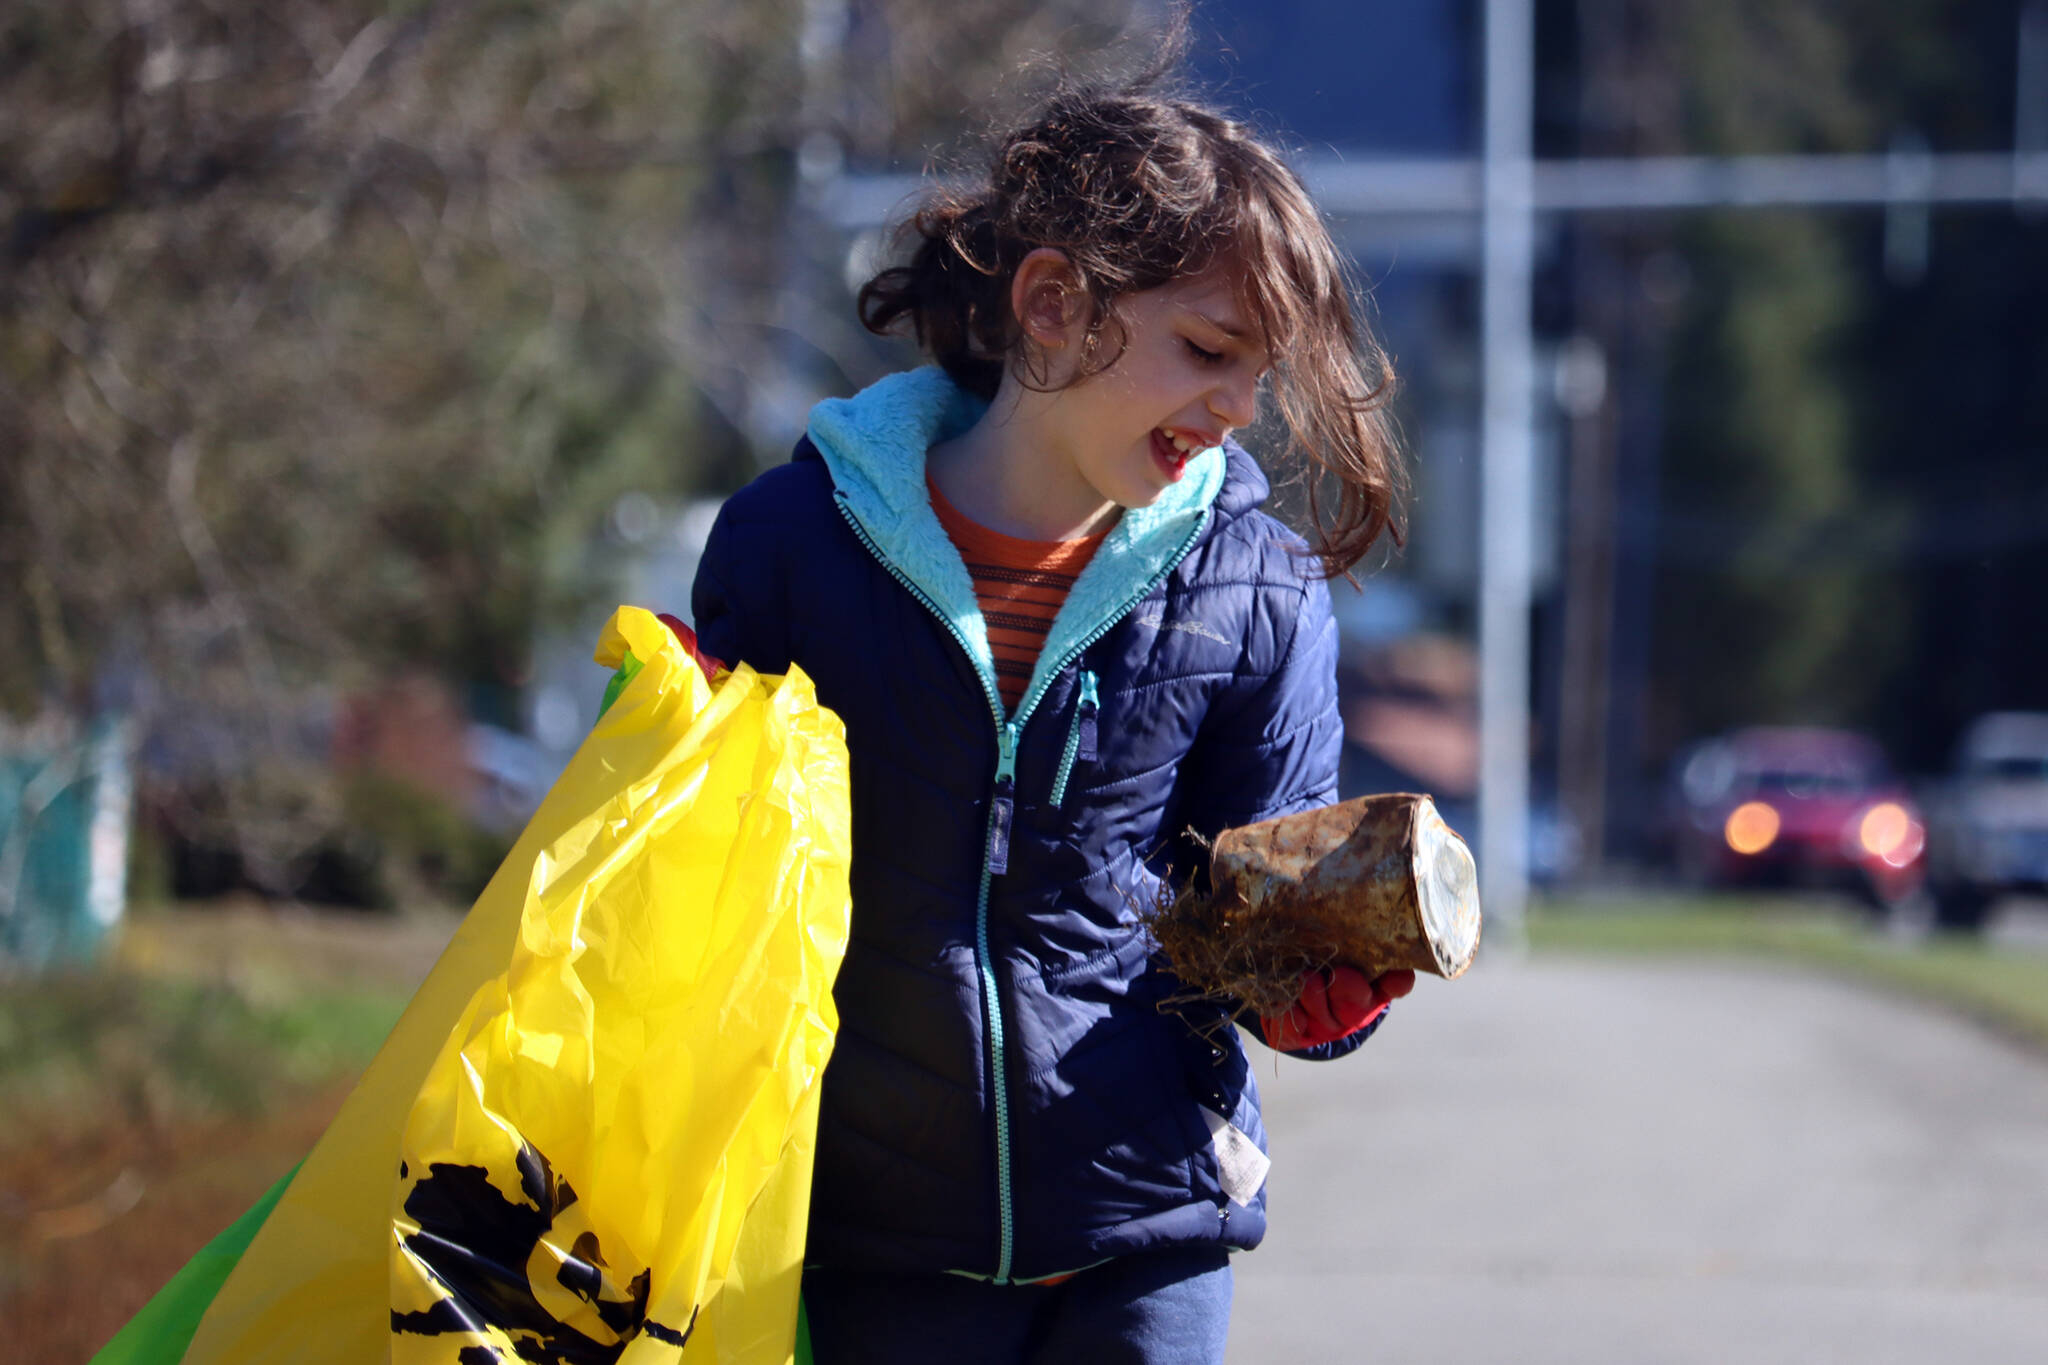 Ben Hohenstatt / Juneau Empire
Gerald Thill, 7, inspects a weathered can before placing it in a litter bag on Saturday during the citywide cleanup.